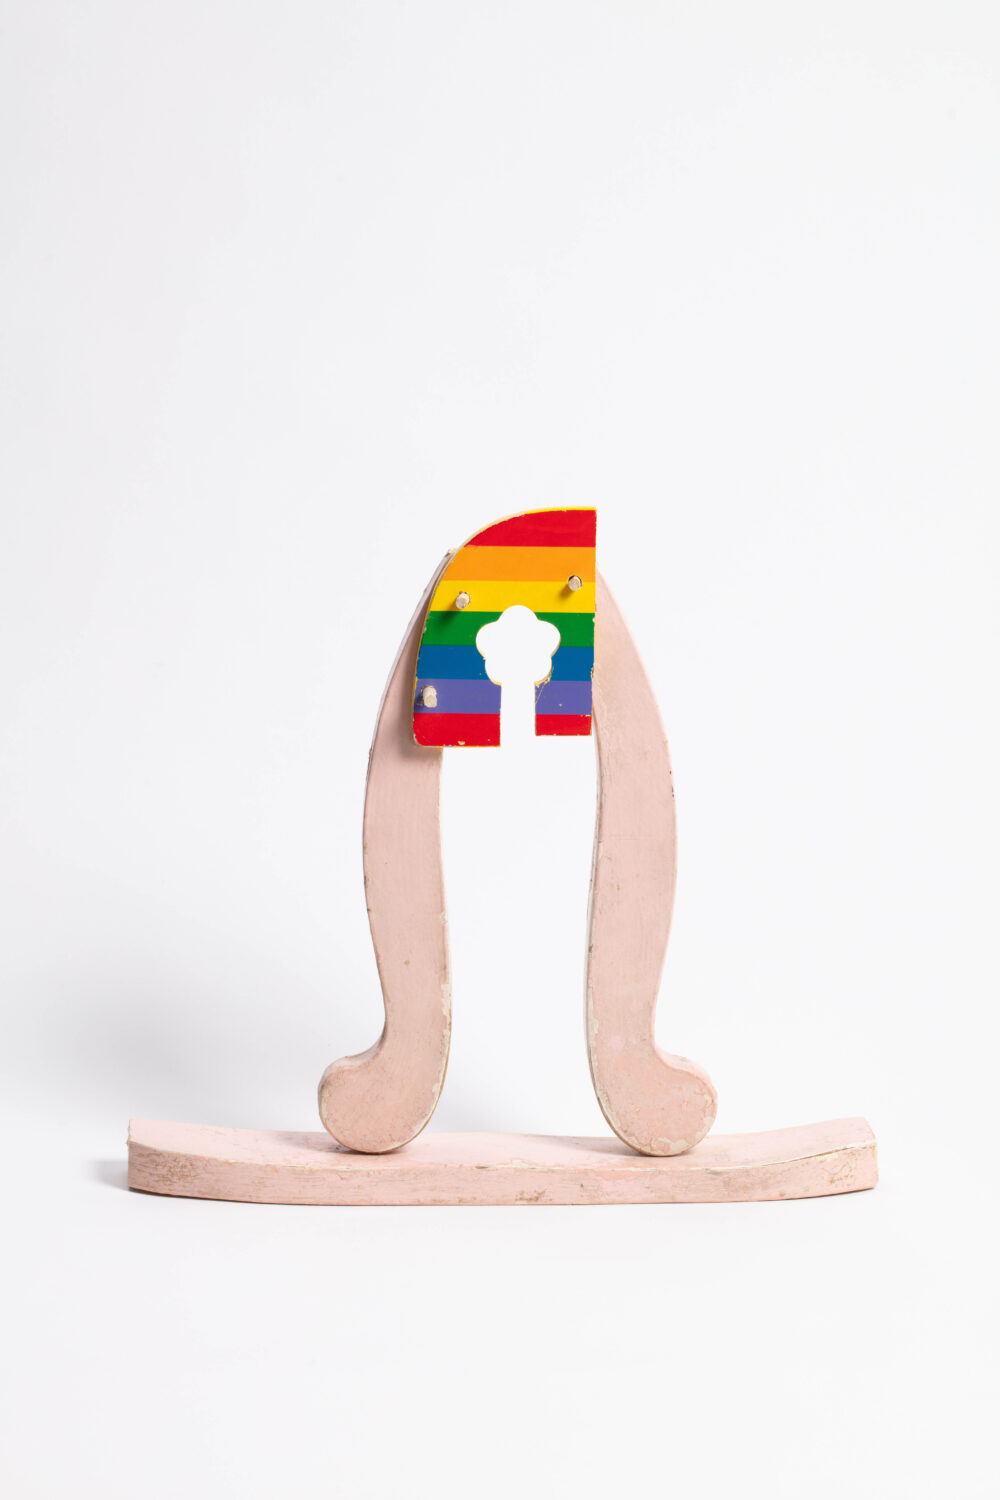 A small wooden sculpture with a pink base and rainbow top with a floral like motif cut away.